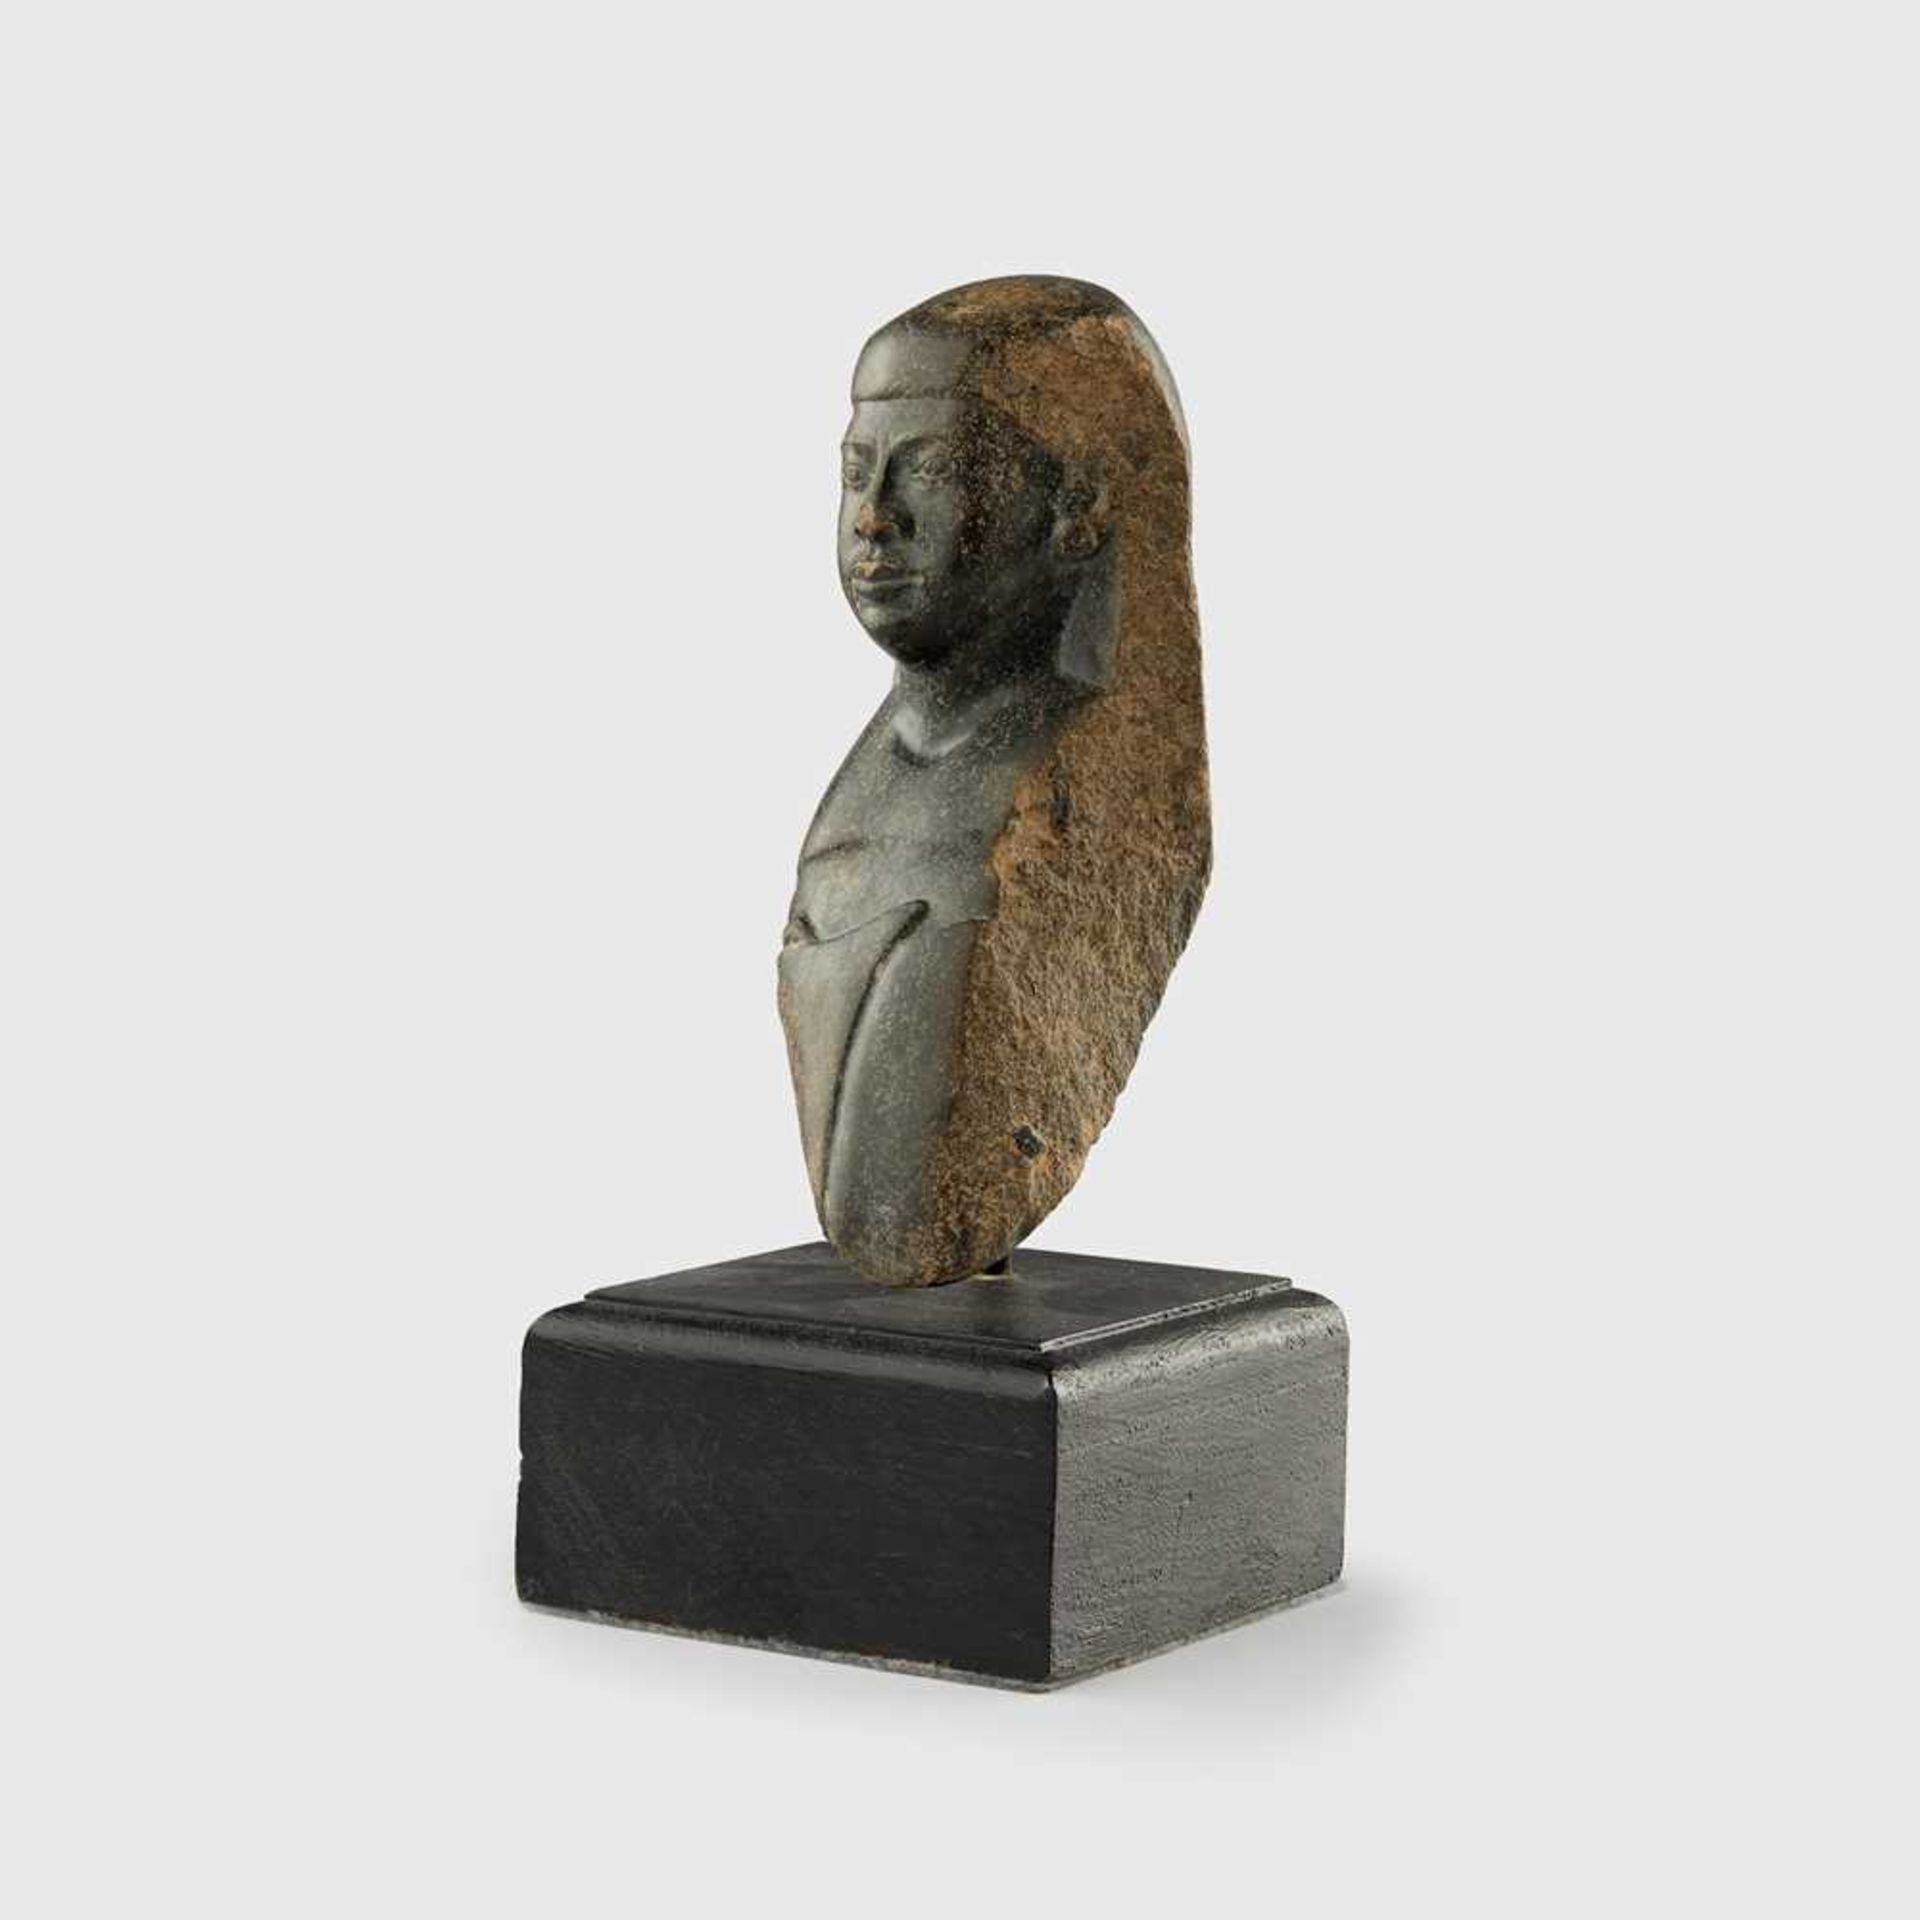 ANCIENT EGYPTIAN PORTRAIT BUST OF AN OFFICIAL EGYPT, MIDDLE KINGDOM, C. 2040 - 1782 B.C.